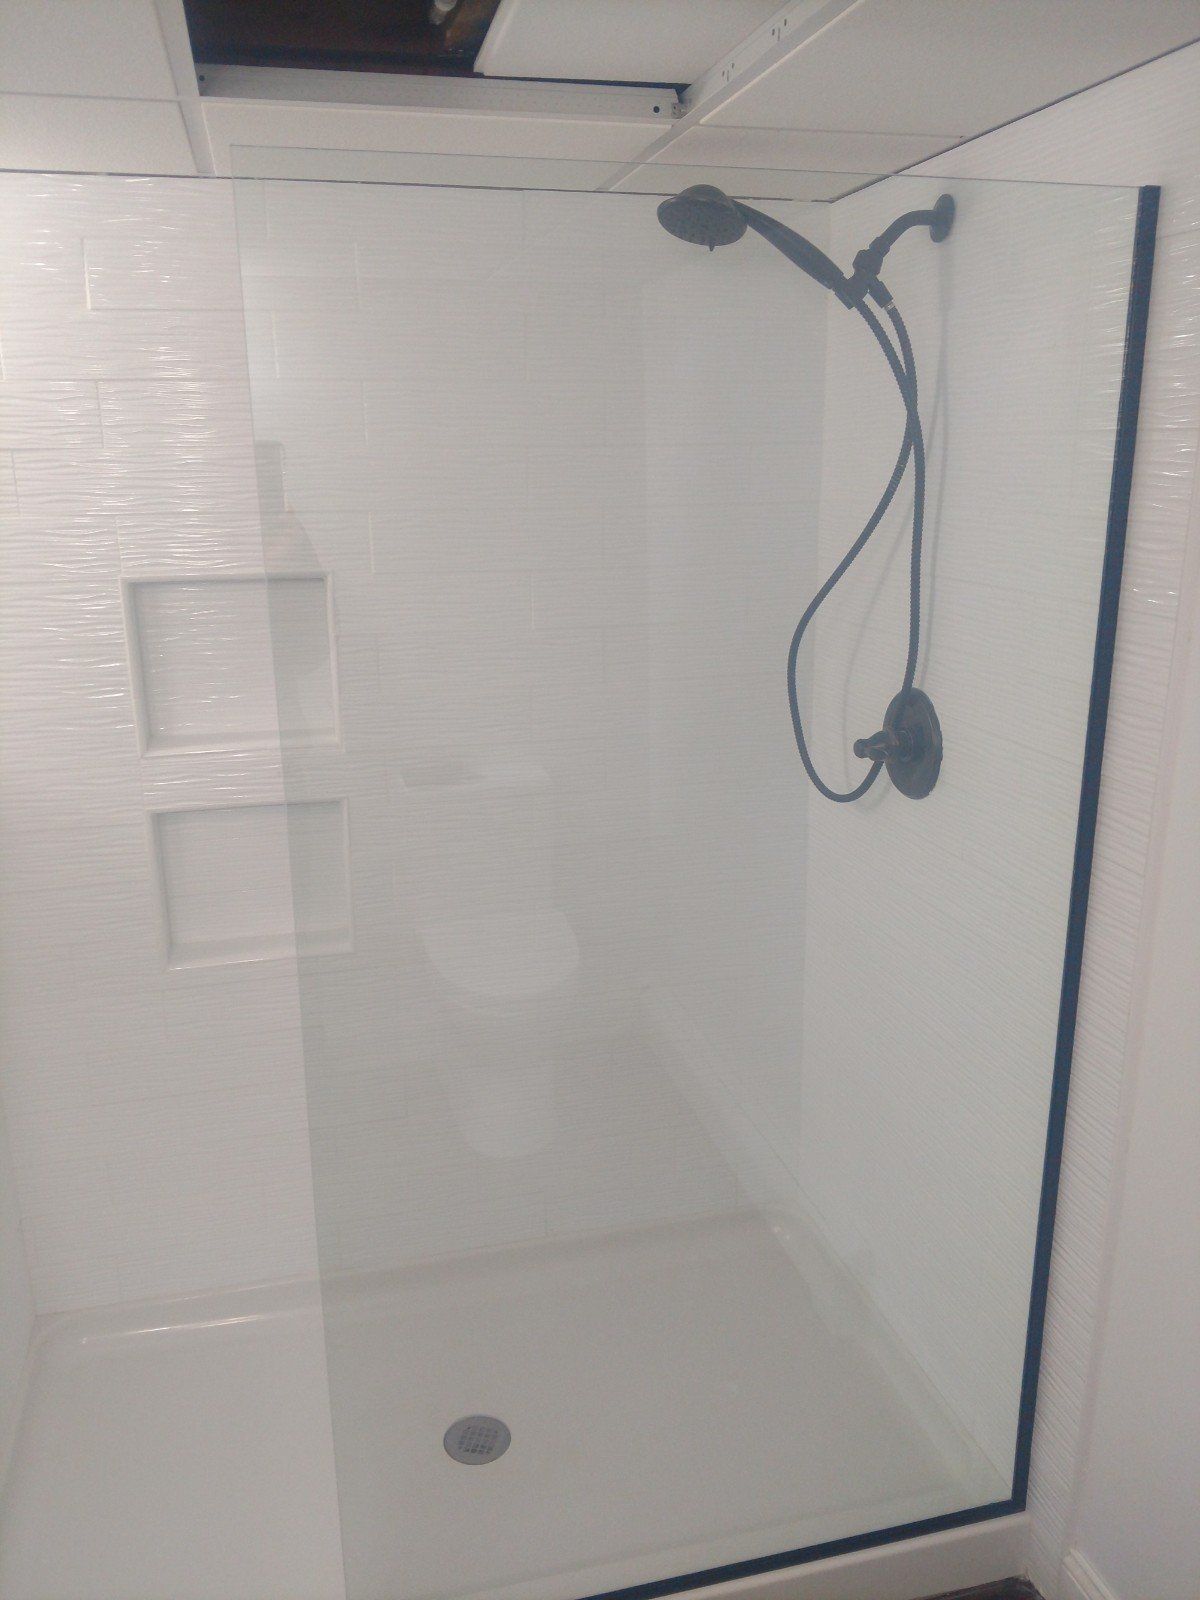 Professional Residential Home Repair Company — Shower 1 in Allenstown, NH